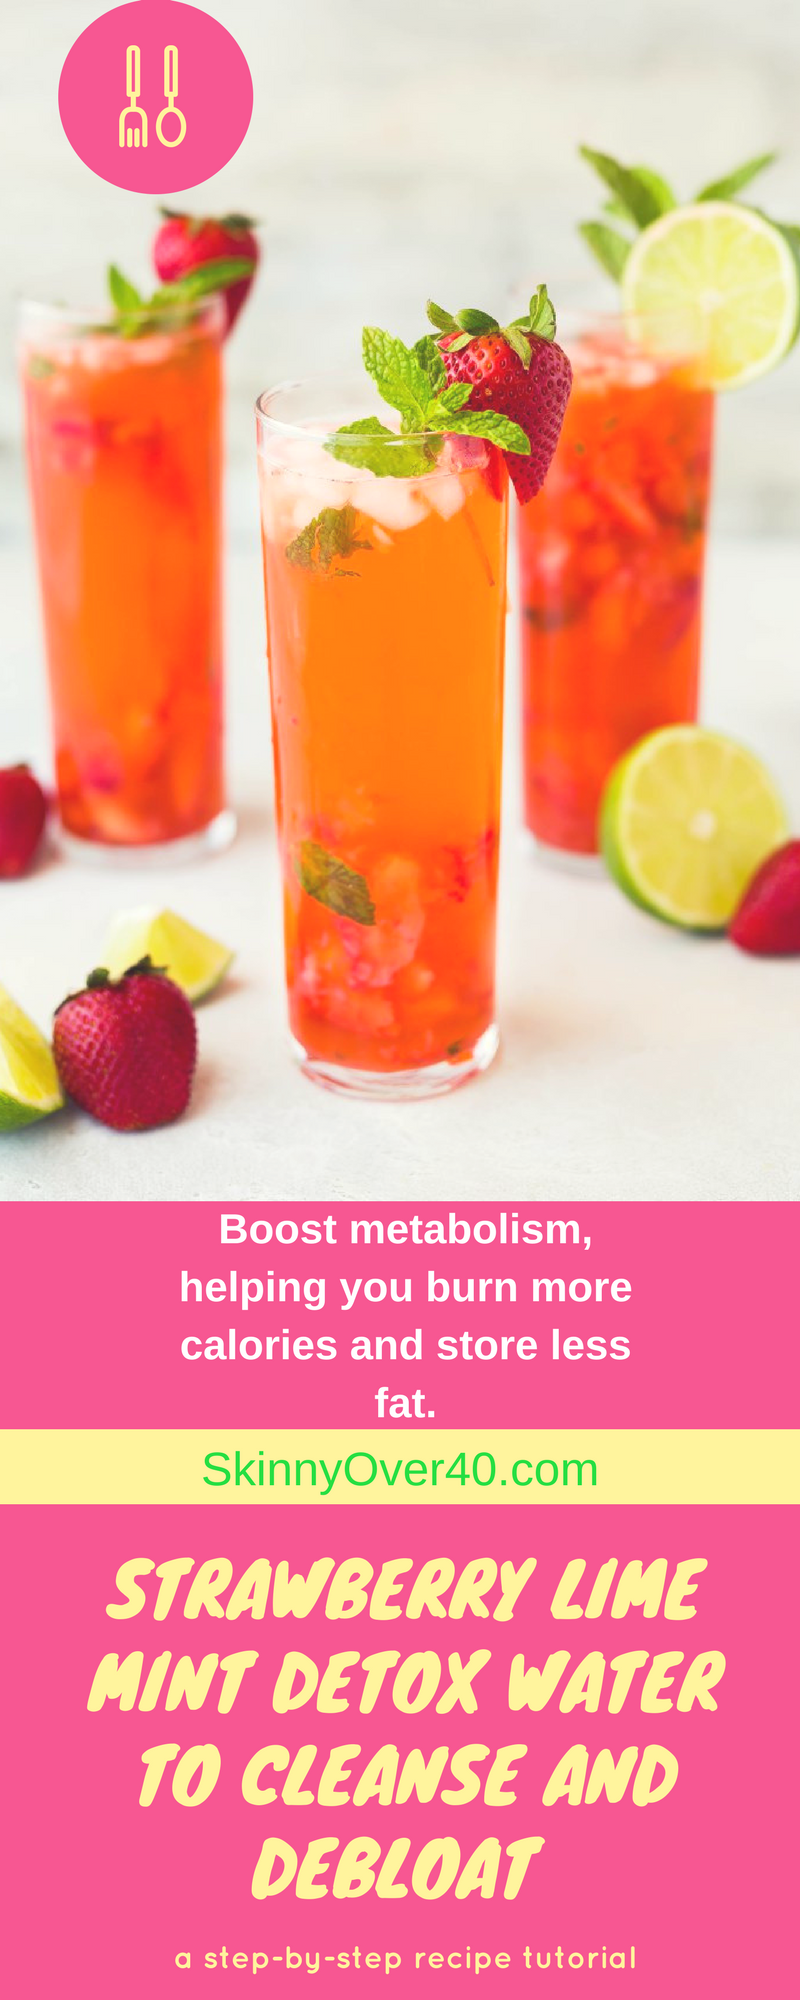 Drink detox water to cleanse your body of toxins and to help with belly bloat. Lose weight while drinking plenty of water with natural detoxifying ingredients. Weight Loss is achieved drinking water.